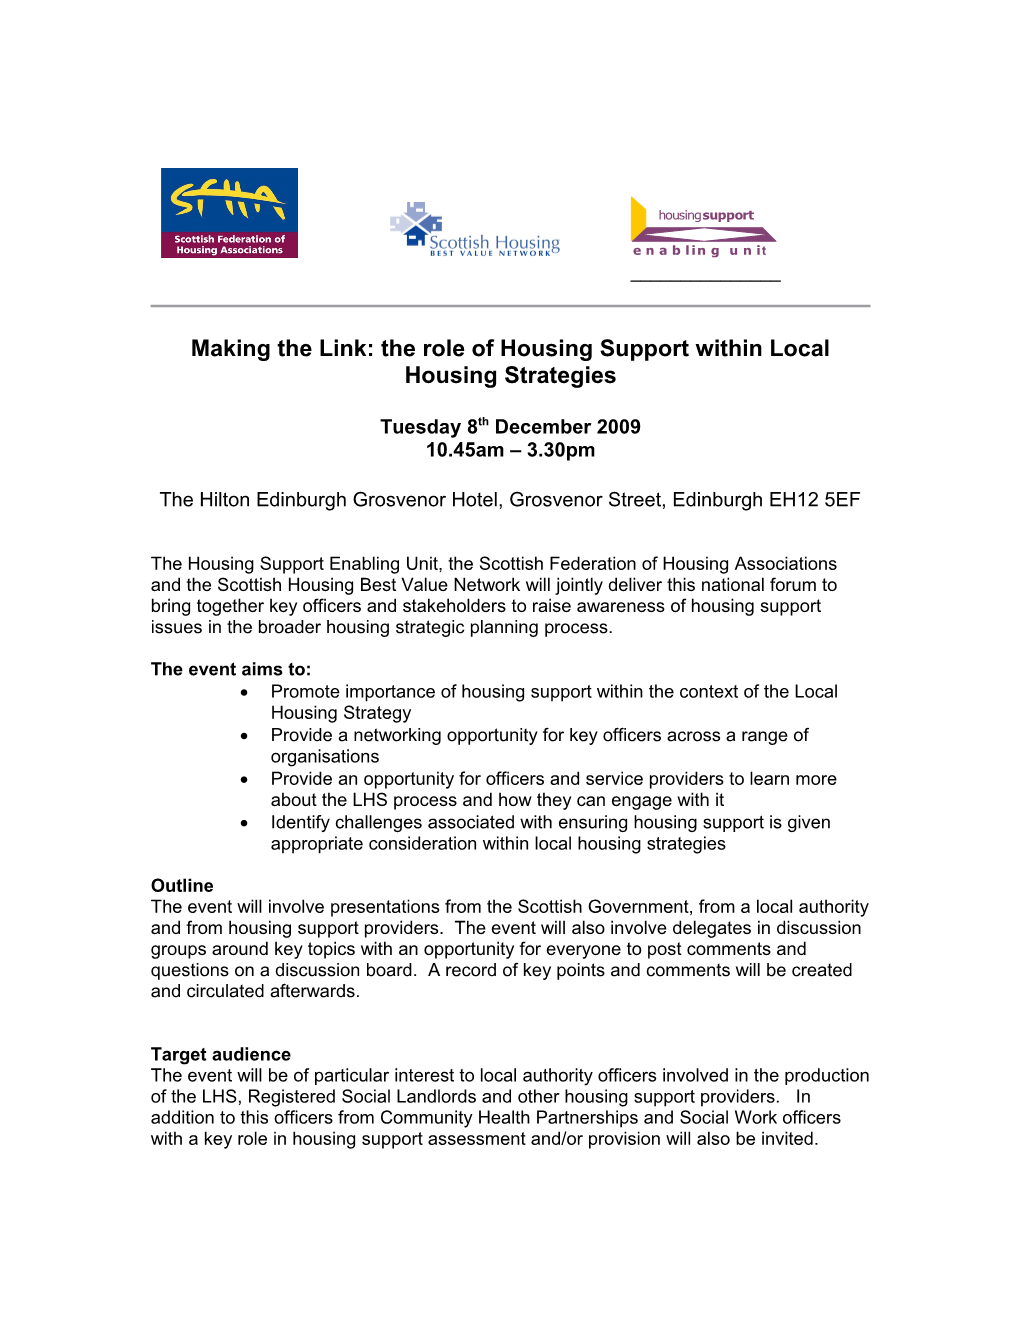 Making the Link: the Role of Housing Support Within Local Housing Strategies